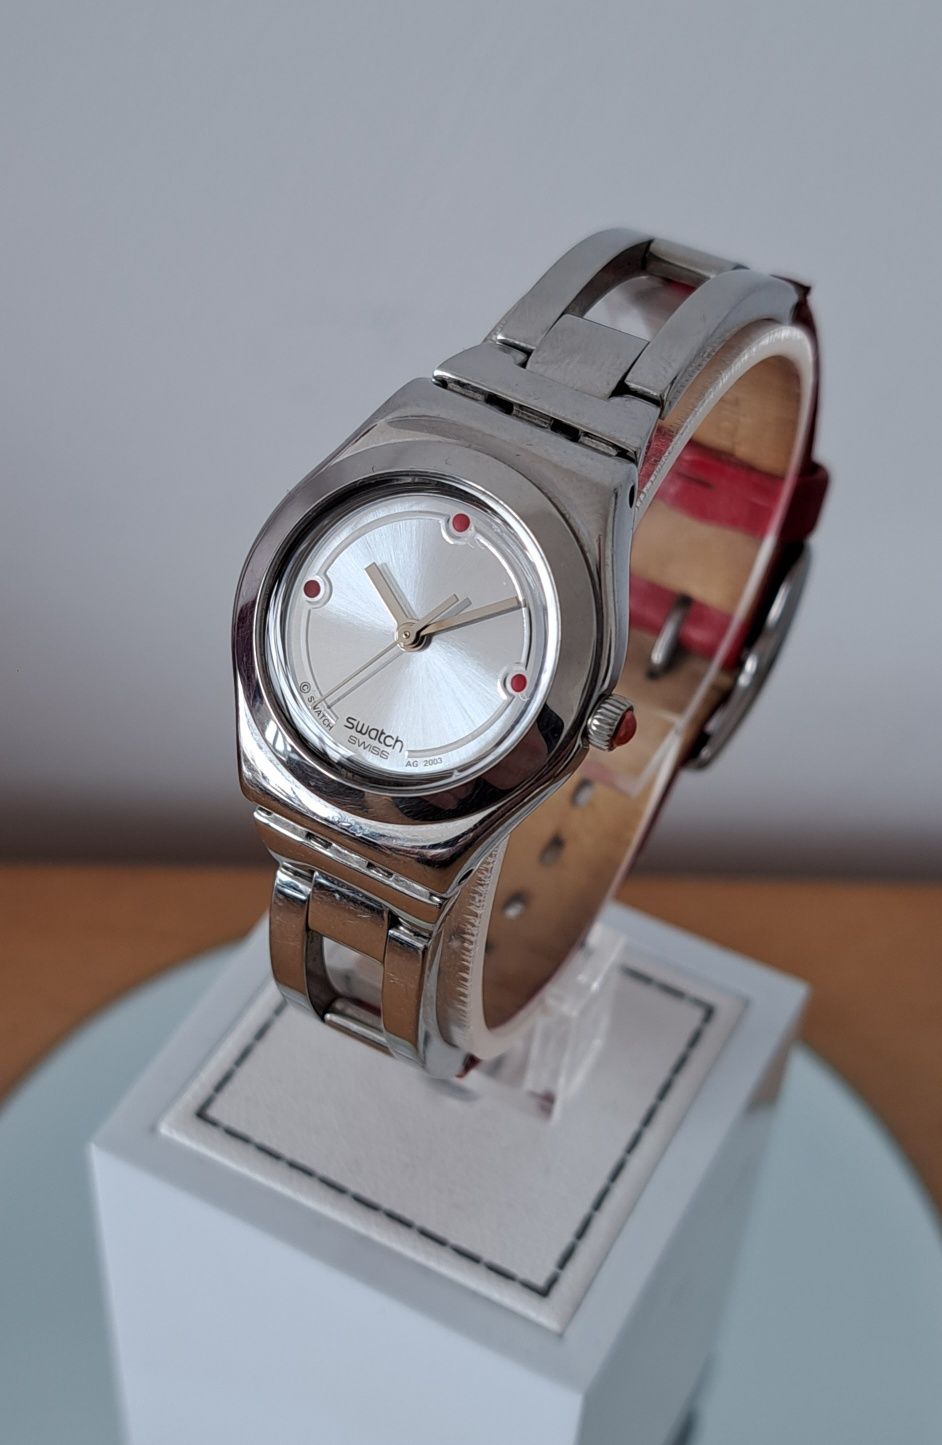 Swatch Irony dama YSS161 Rote Lippen 2003 vintage